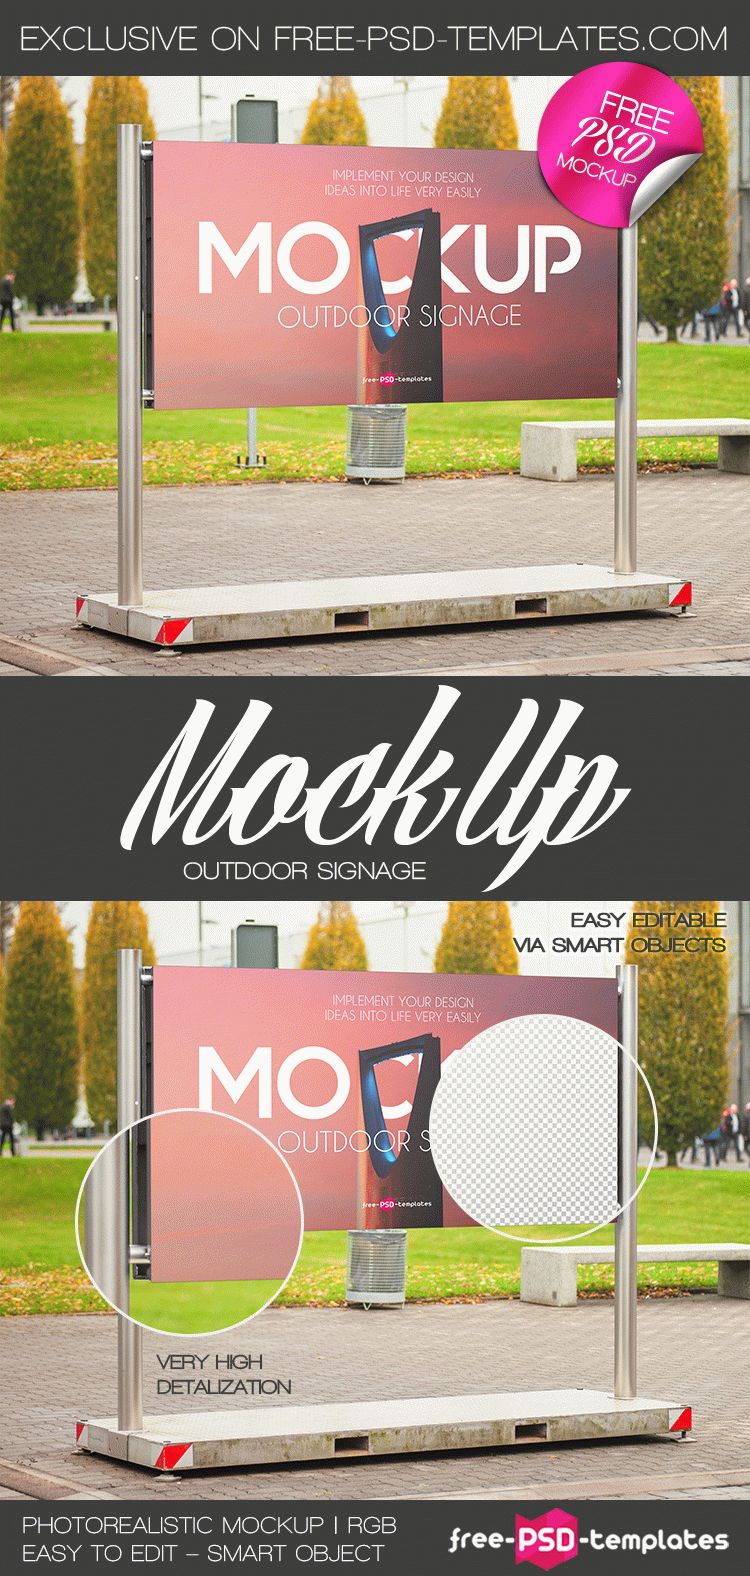 Download Free Outdoor Signage Mock Up In Psd Free Psd Templates Yellowimages Mockups